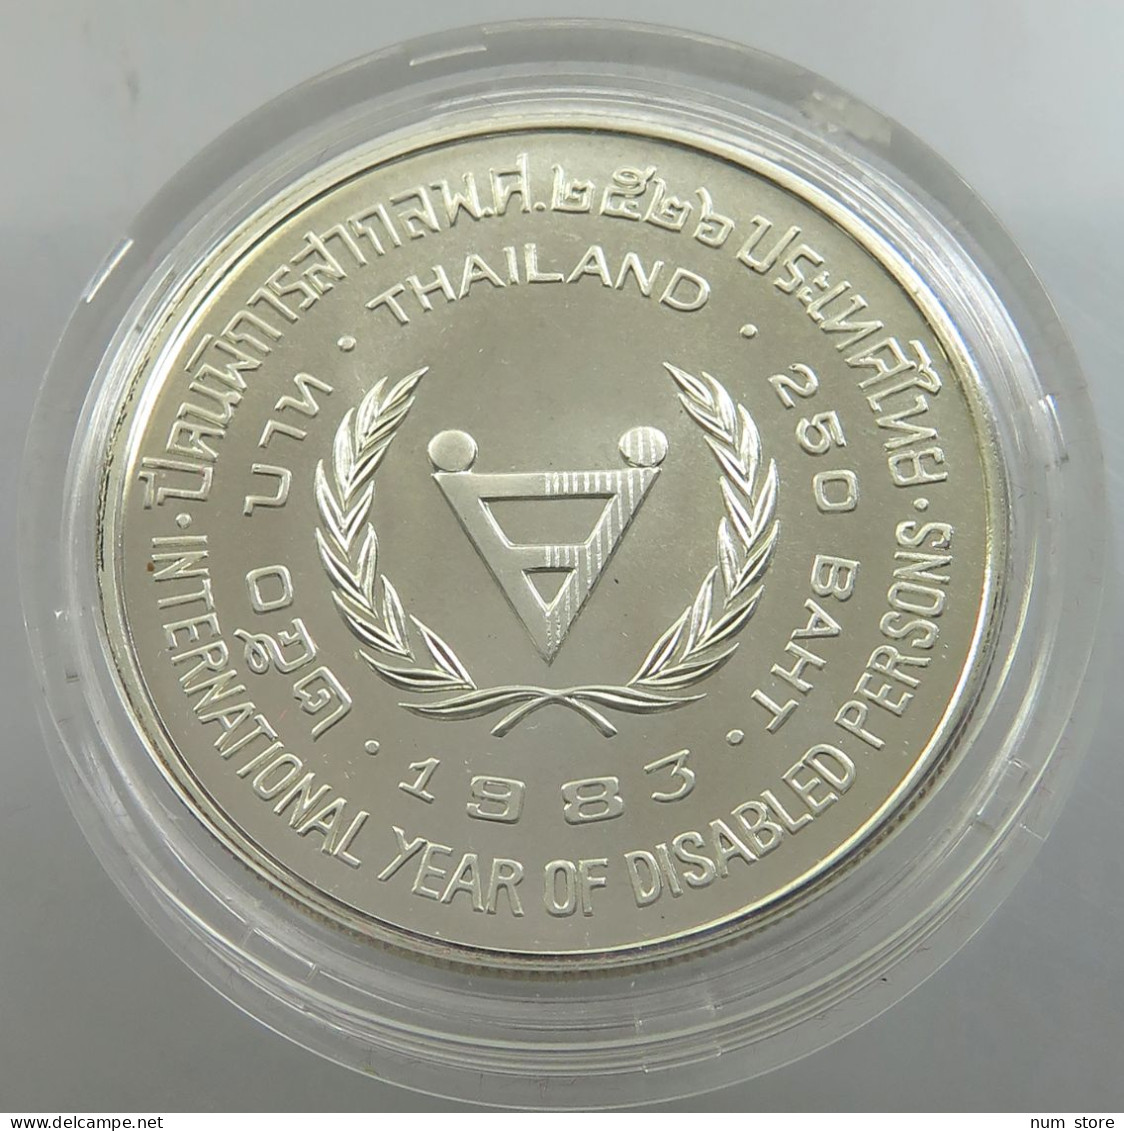 THAILAND 250 BAHT 1983 International Year Of Disabled Persons SILVER UNC #sm14 0045 - Thaïlande